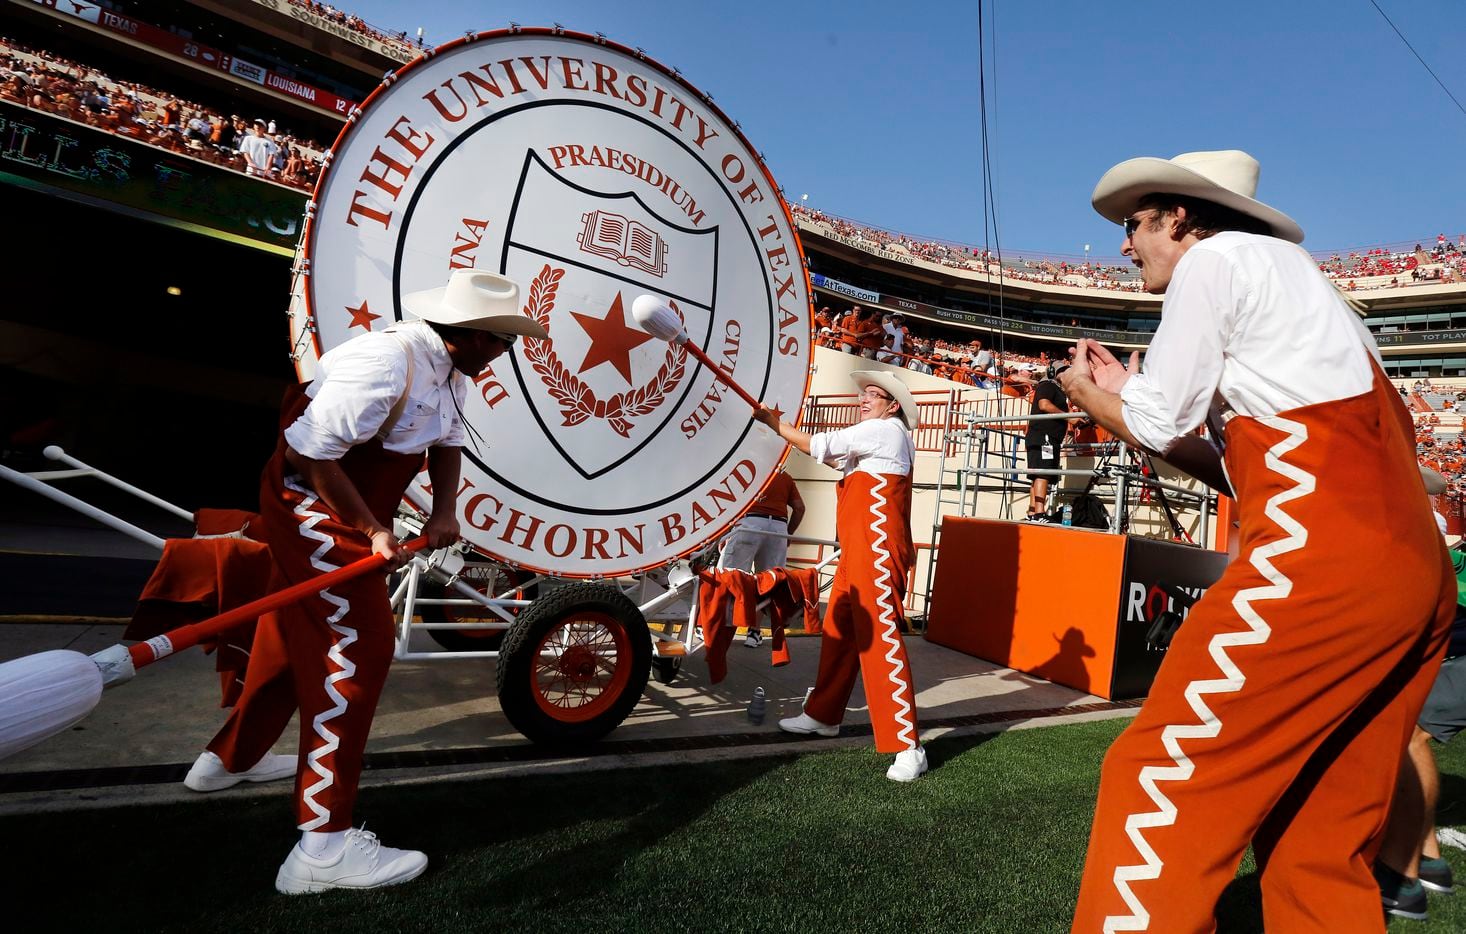 Texas Longhorn Band members beat the bass drum after a second half touchdown against the Louisiana-Lafayette Ragin Cajuns at DKR-Texas Memorial Stadium in Austin, Saturday, September 4, 2021. (Tom Fox/The Dallas Morning News)